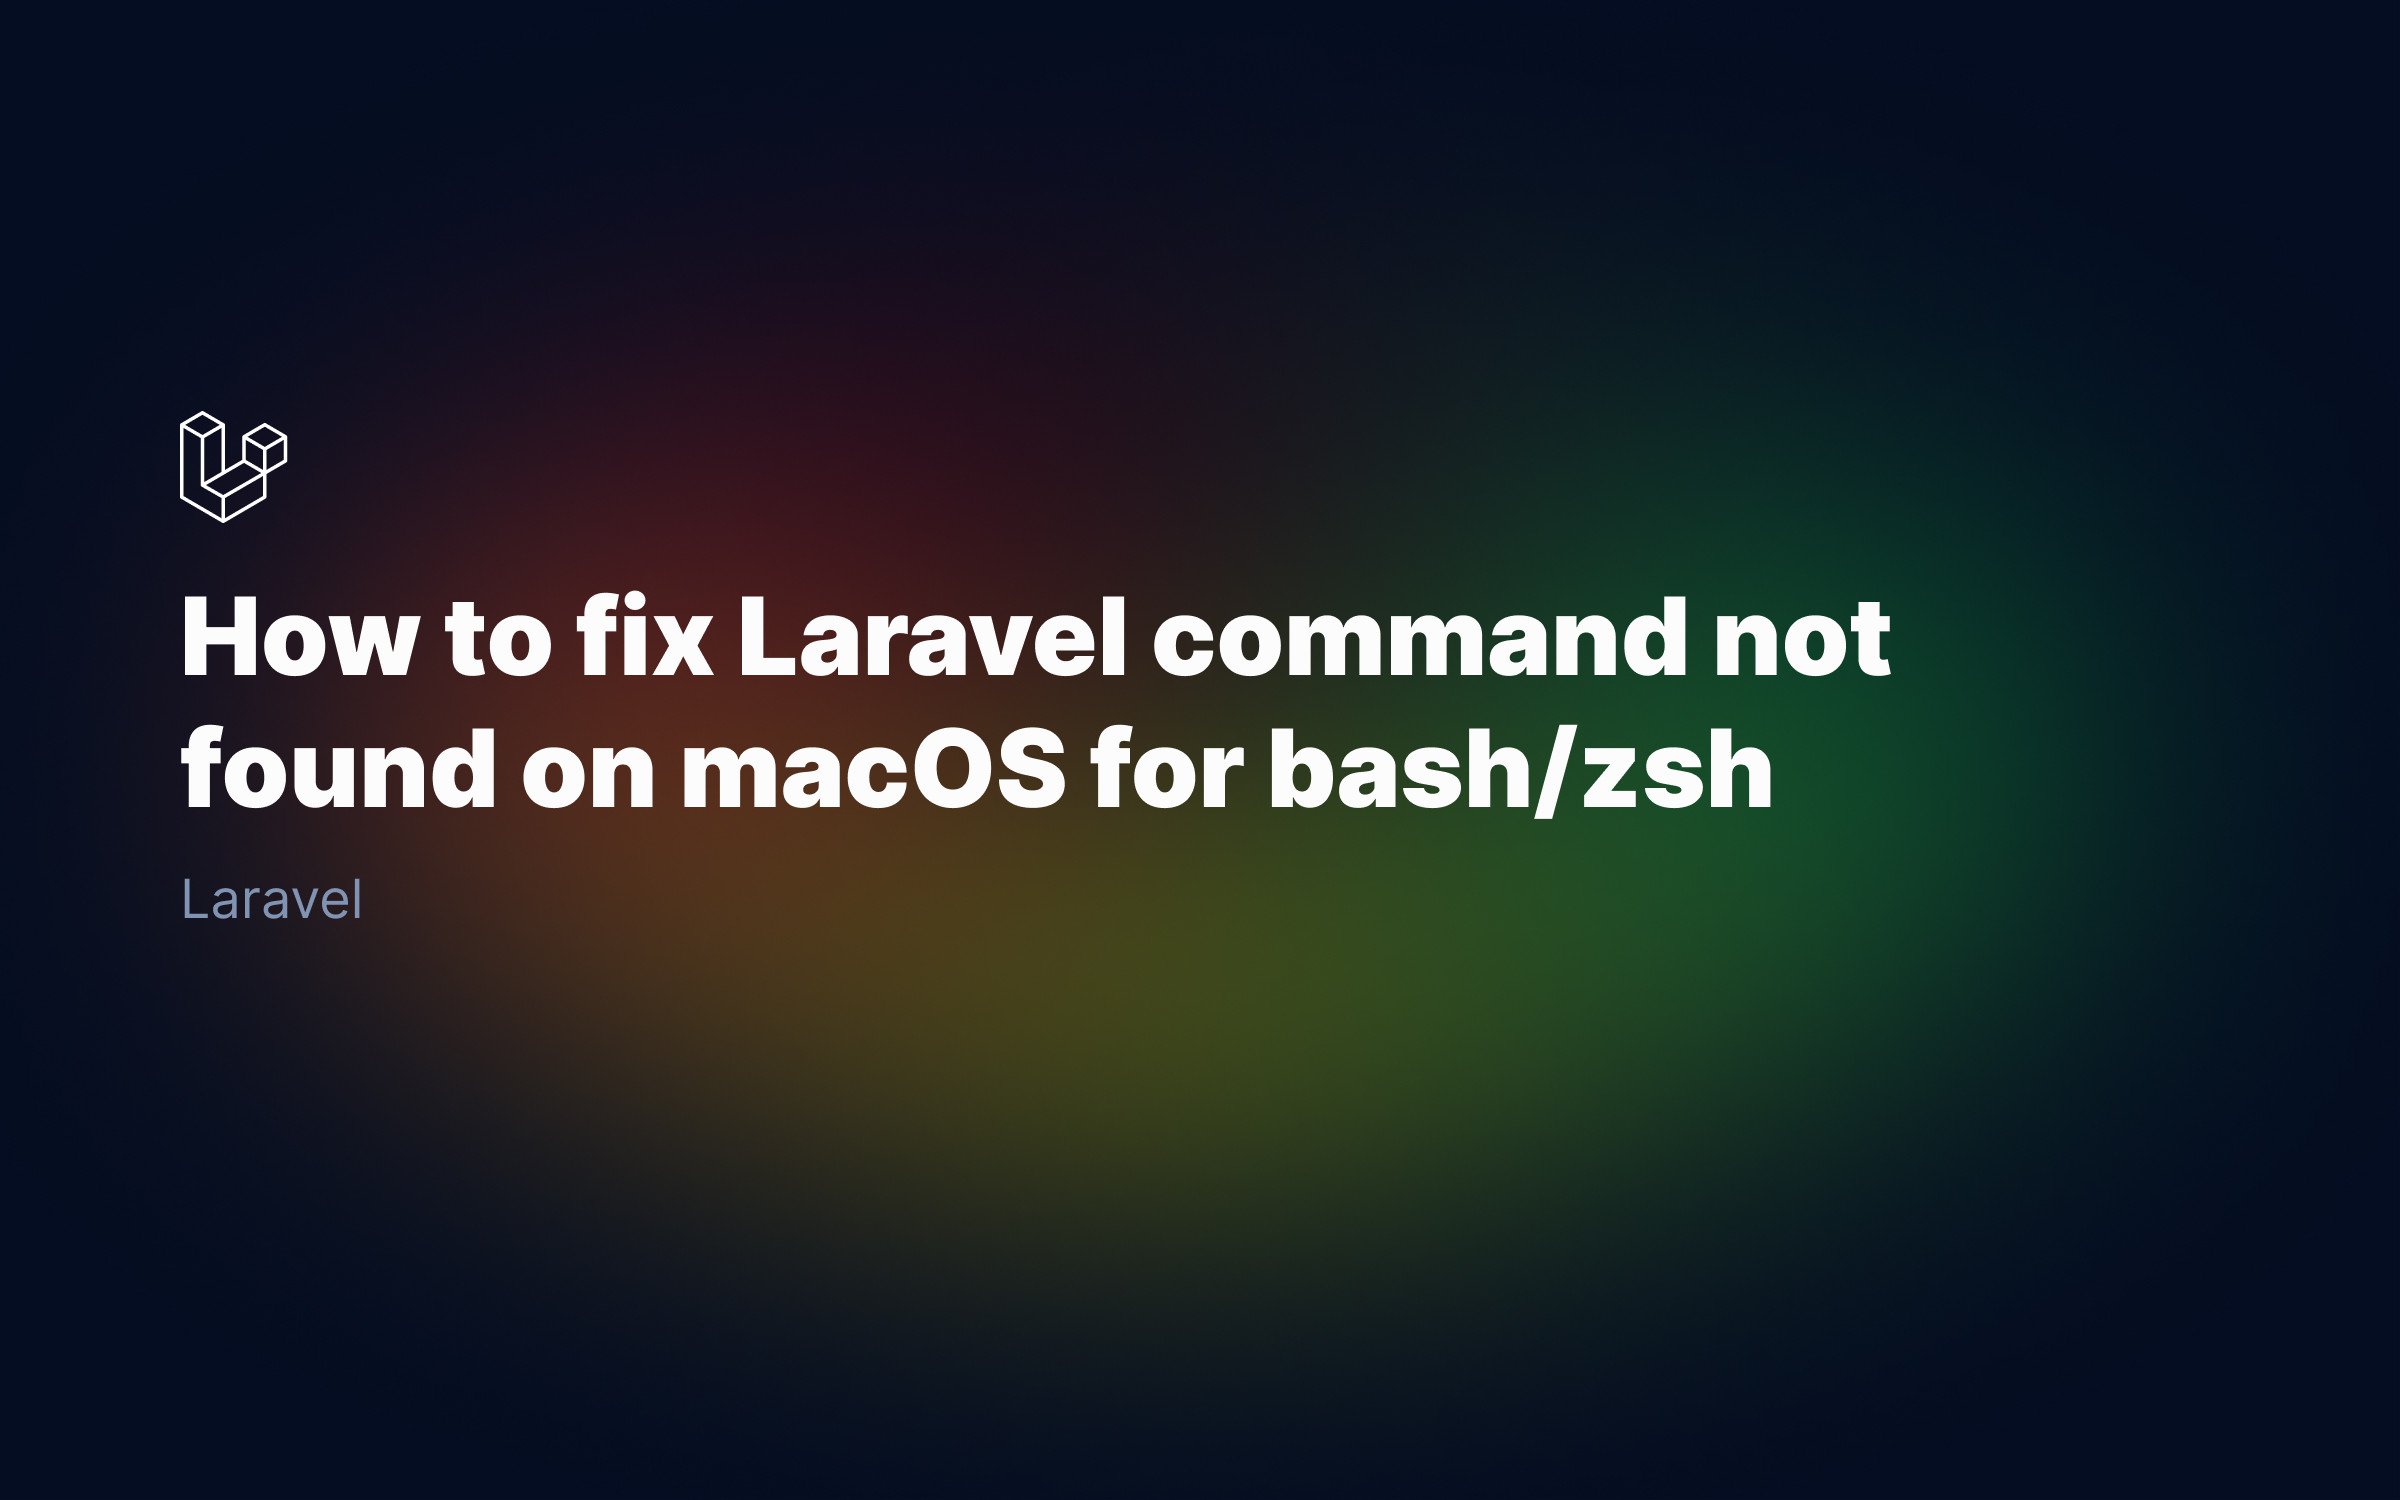 How to fix Laravel command not found on macOS for bash/zsh